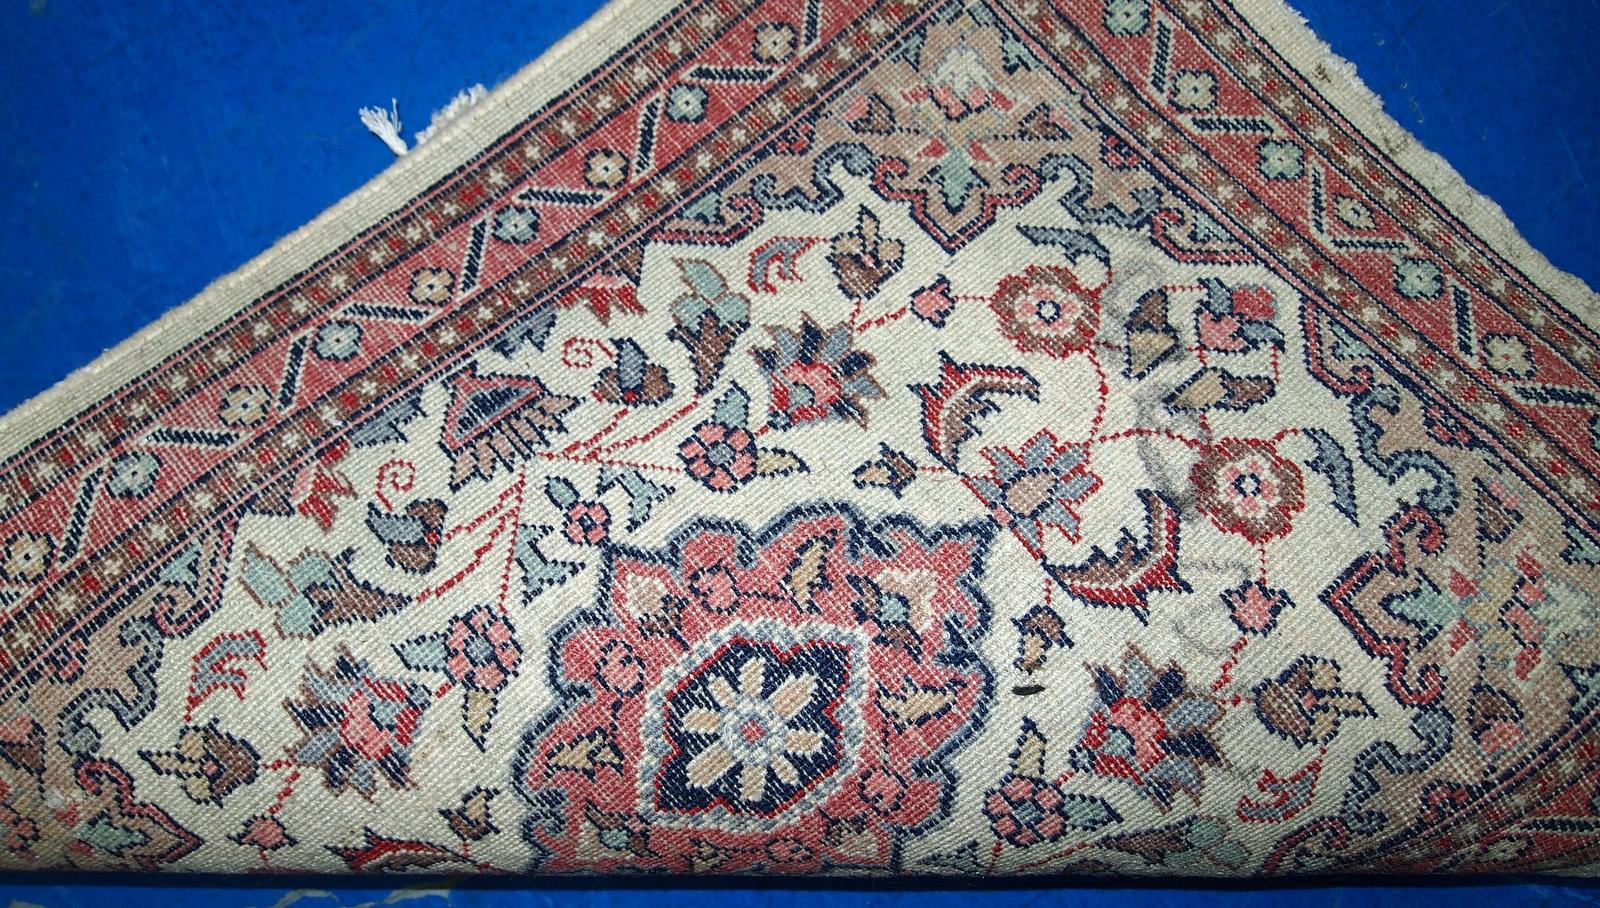 Vintage handmade Indian rug from the end of 20th century. The rug is in original good condition in a beige shade and floral design.

-condition: original good,

-circa: 1970s,

-size: 1.6' x 2.1' (49cm x 66cm),

-material: wool,

-country